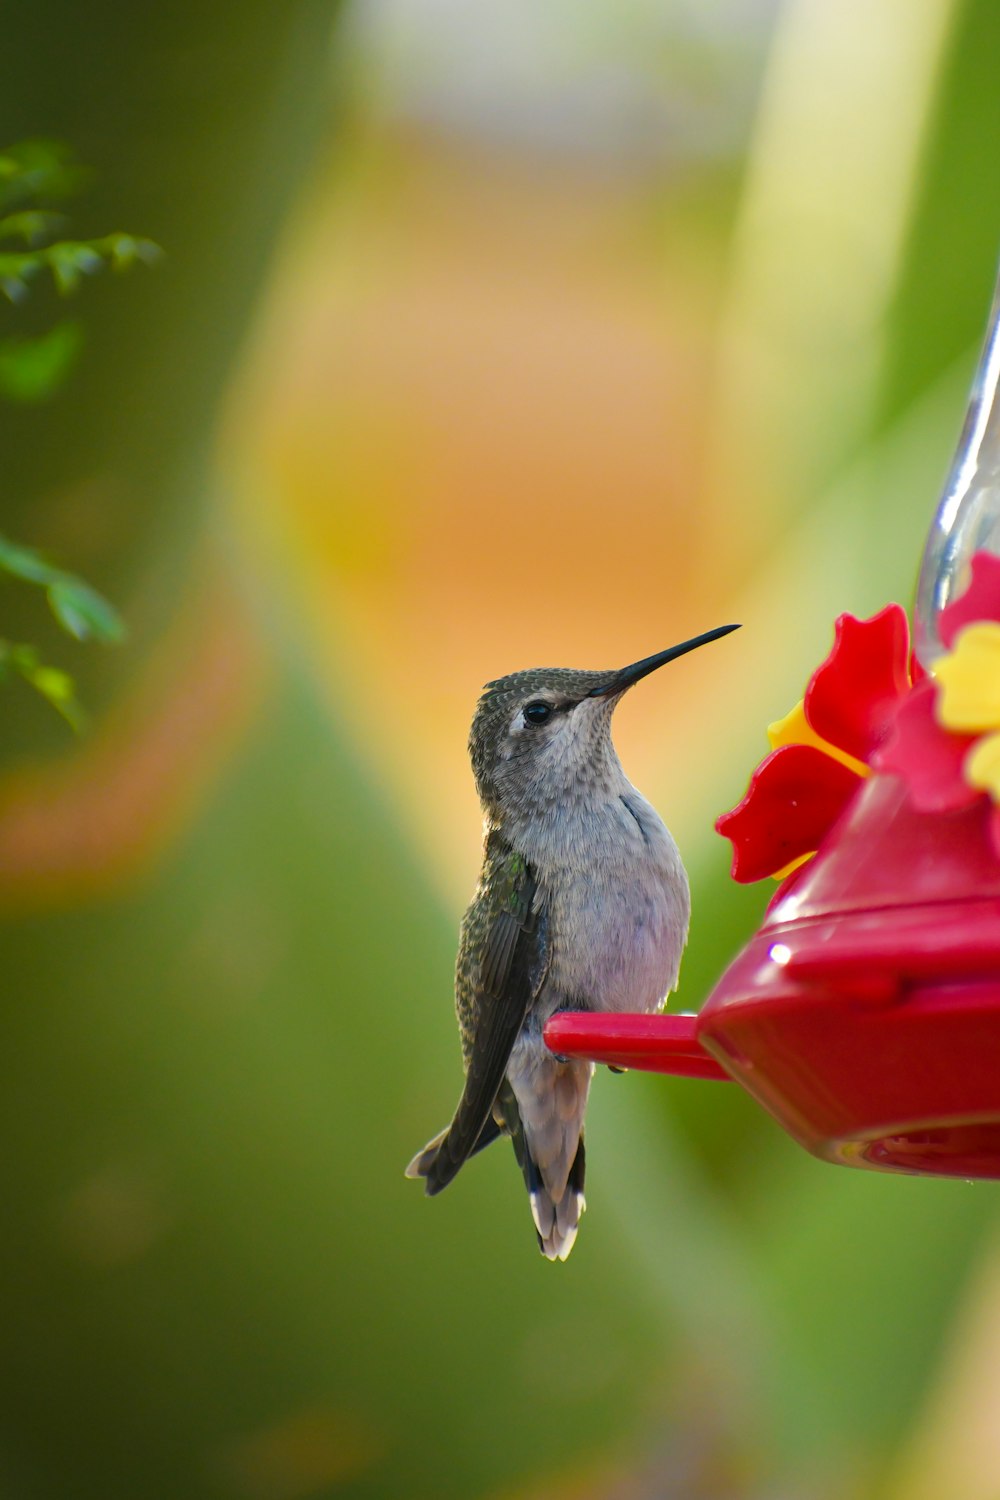 gray and black humming bird on red flower